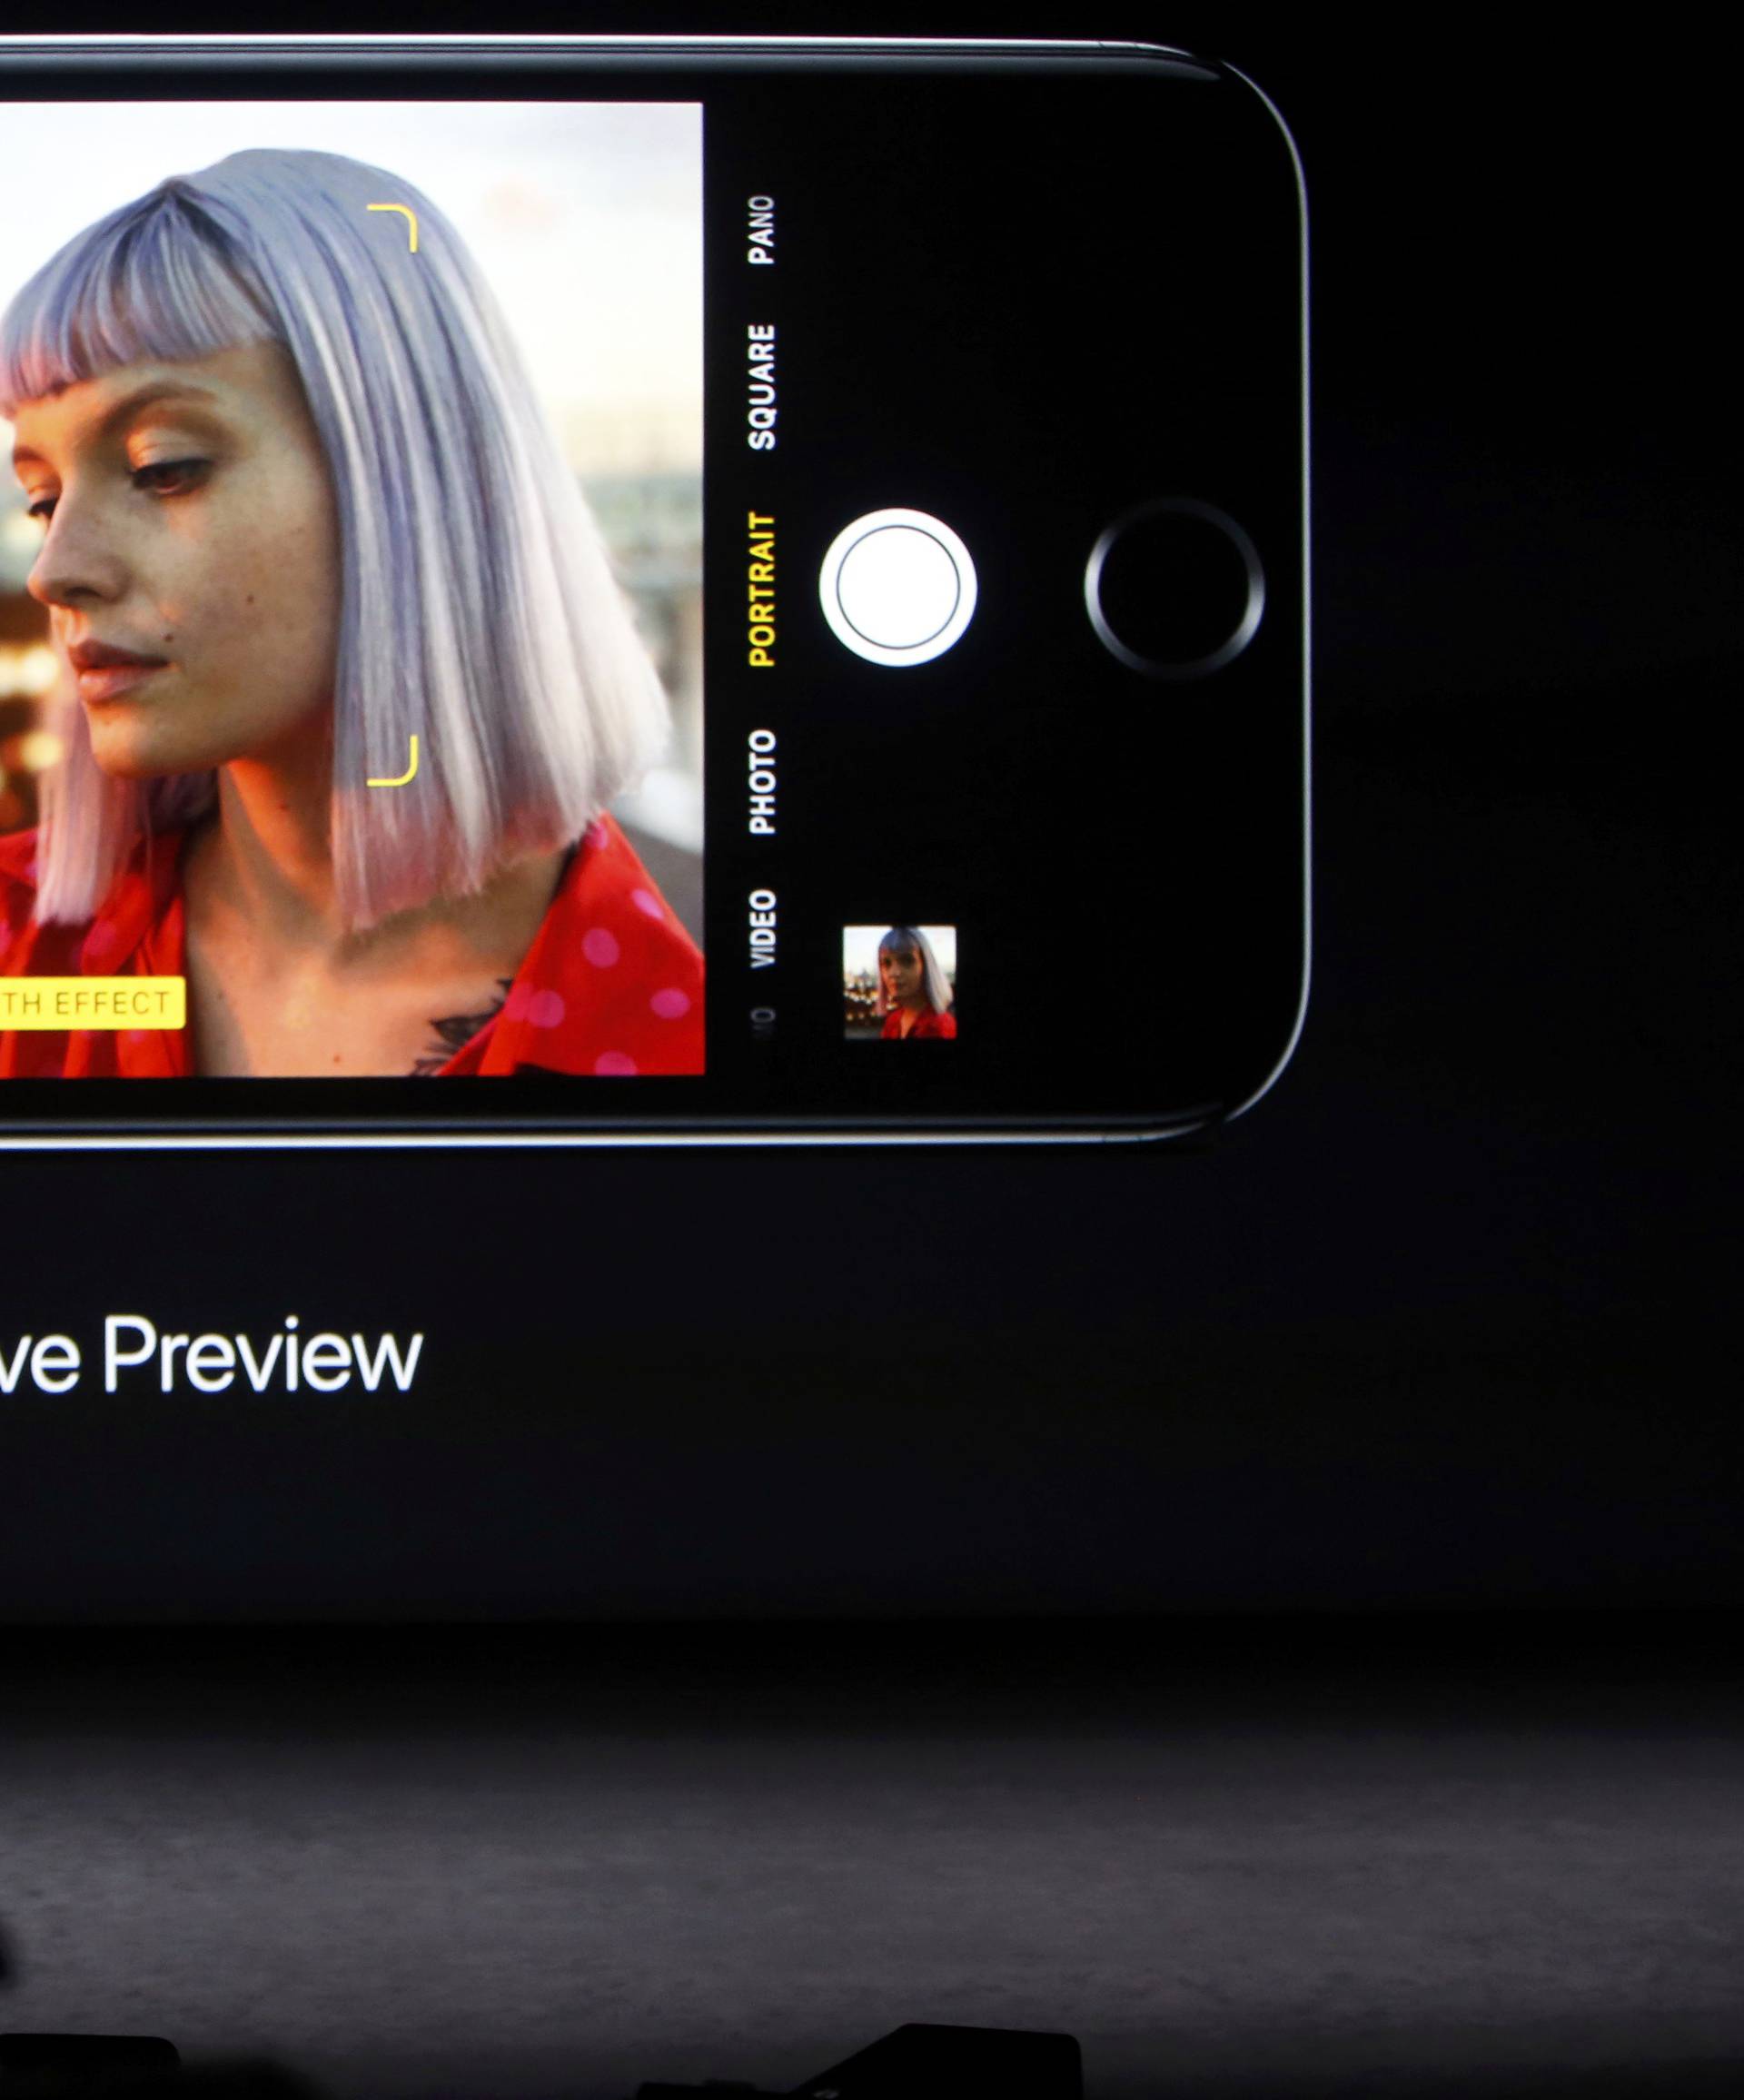 Phil Schiller discusses the depth of field and bokeh effects in the iPhone 7 Plus during an Apple media event in San Francisco